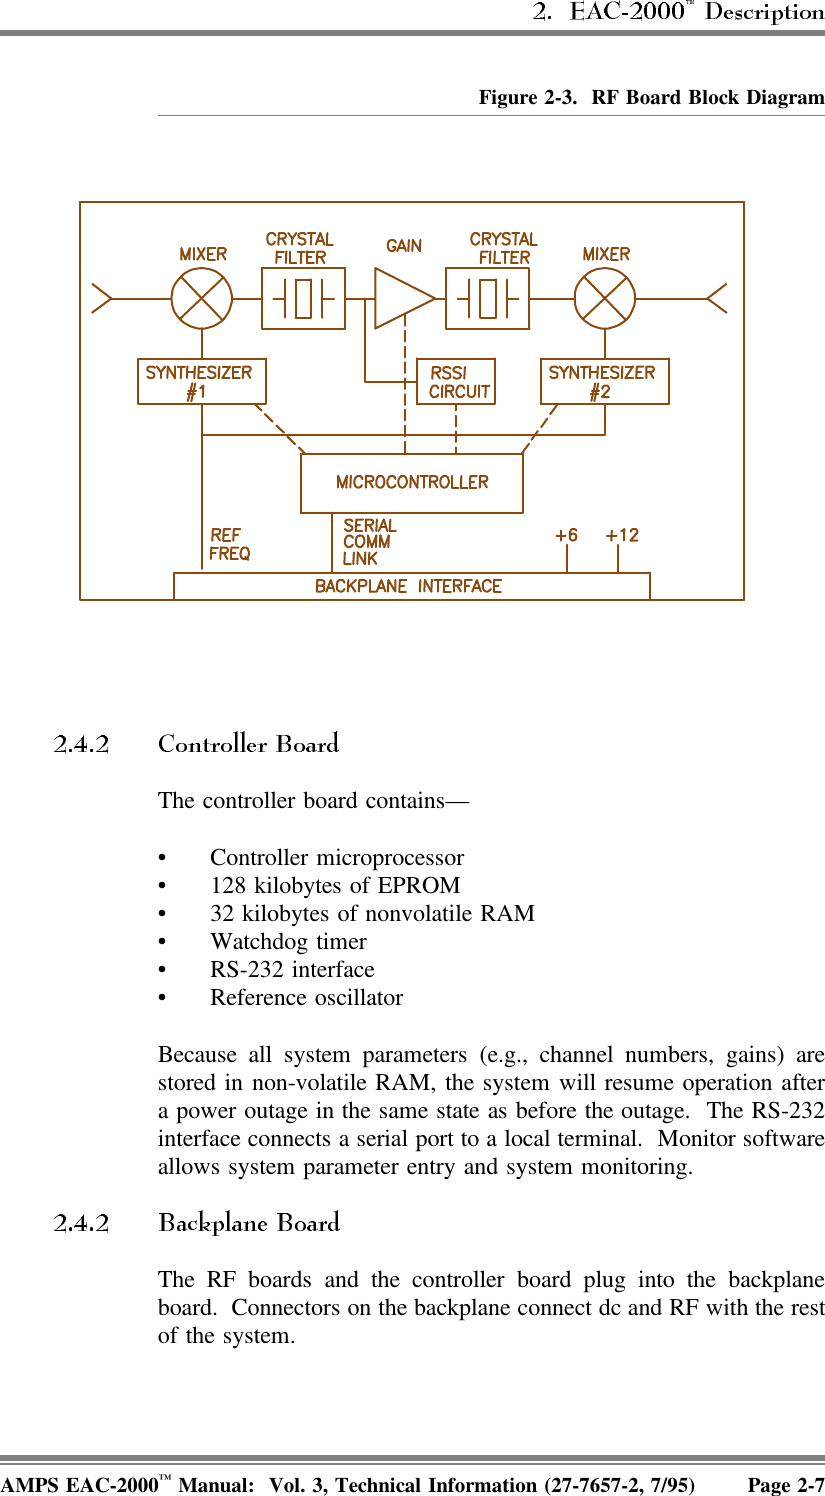 Figure 2-3.  RF Board Block DiagramThe controller board contains—• Controller microprocessor • 128 kilobytes of EPROM • 32 kilobytes of nonvolatile RAM • Watchdog timer• RS-232 interface• Reference oscillatorBecause all system parameters (e.g., channel numbers, gains) arestored in non-volatile RAM, the system will resume operation aftera power outage in the same state as before the outage.  The RS-232interface connects a serial port to a local terminal.  Monitor softwareallows system parameter entry and system monitoring. The RF boards and the controller board plug into the backplaneboard.  Connectors on the backplane connect dc and RF with the restof the system.AMPS EAC-2000™ Manual:  Vol. 3, Technical Information (27-7657-2, 7/95) Page 2-7